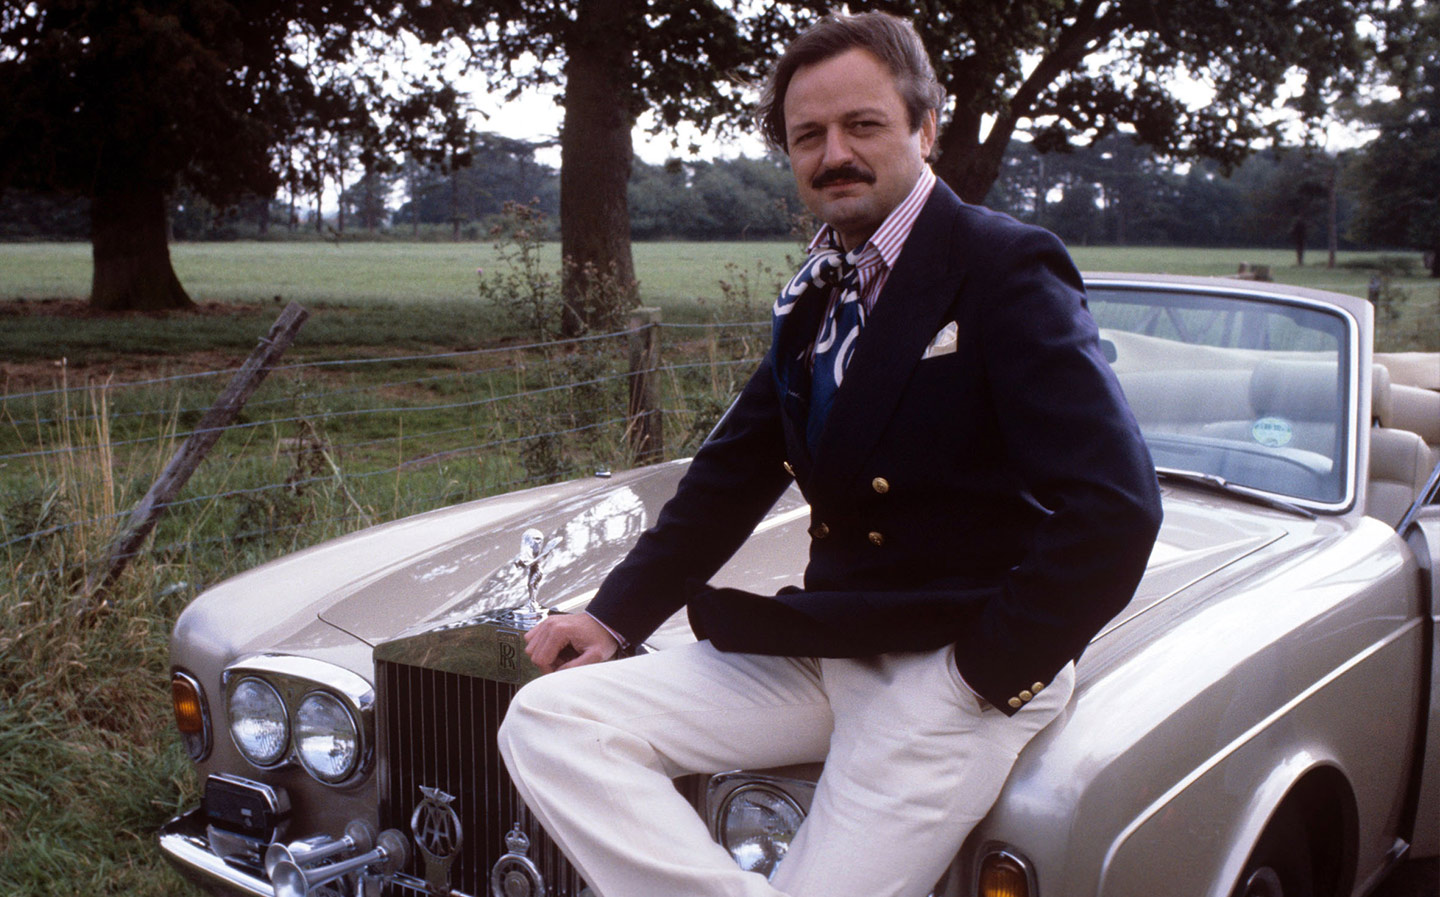 Calls of ageism as Porsche garage tells To The Manor Born star Peter Bowles: You’re too old for courtesy car